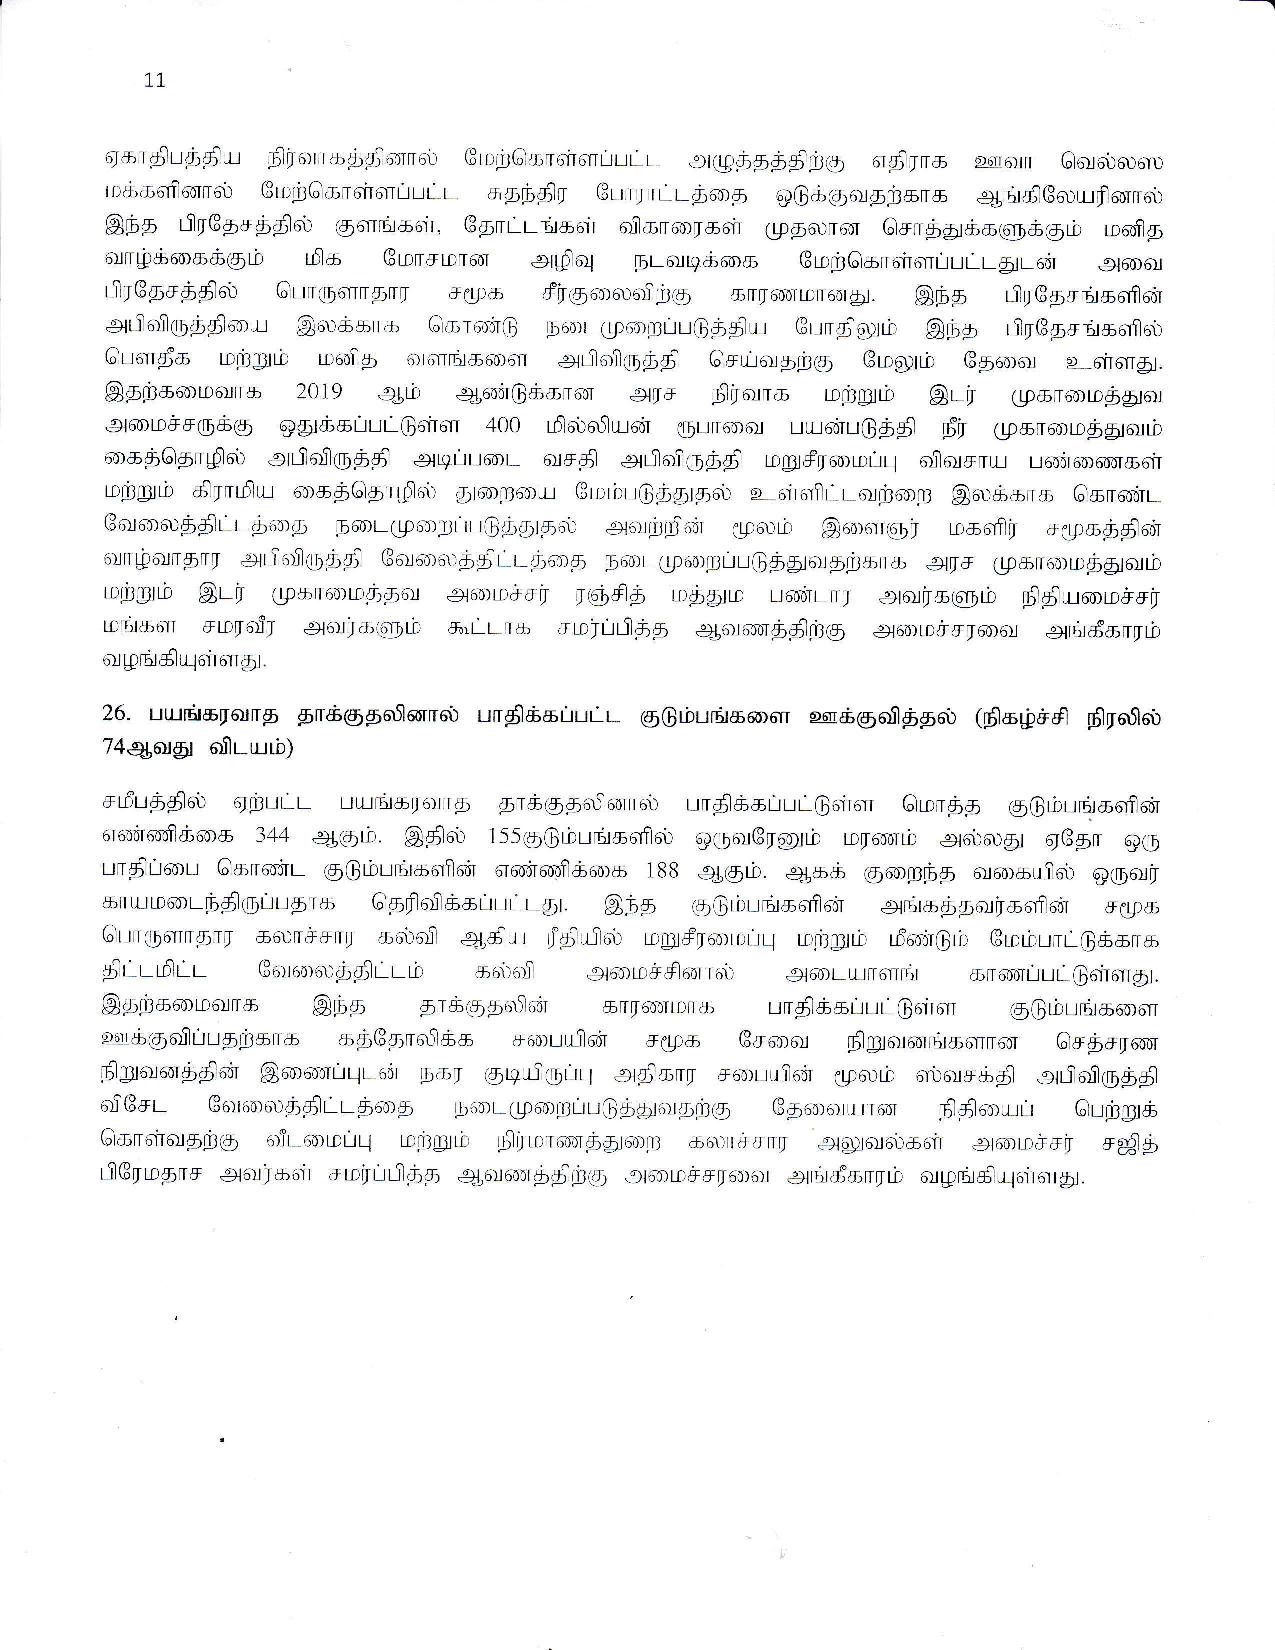 Cabinet Decision on 21.05.2019 Tamil page 012